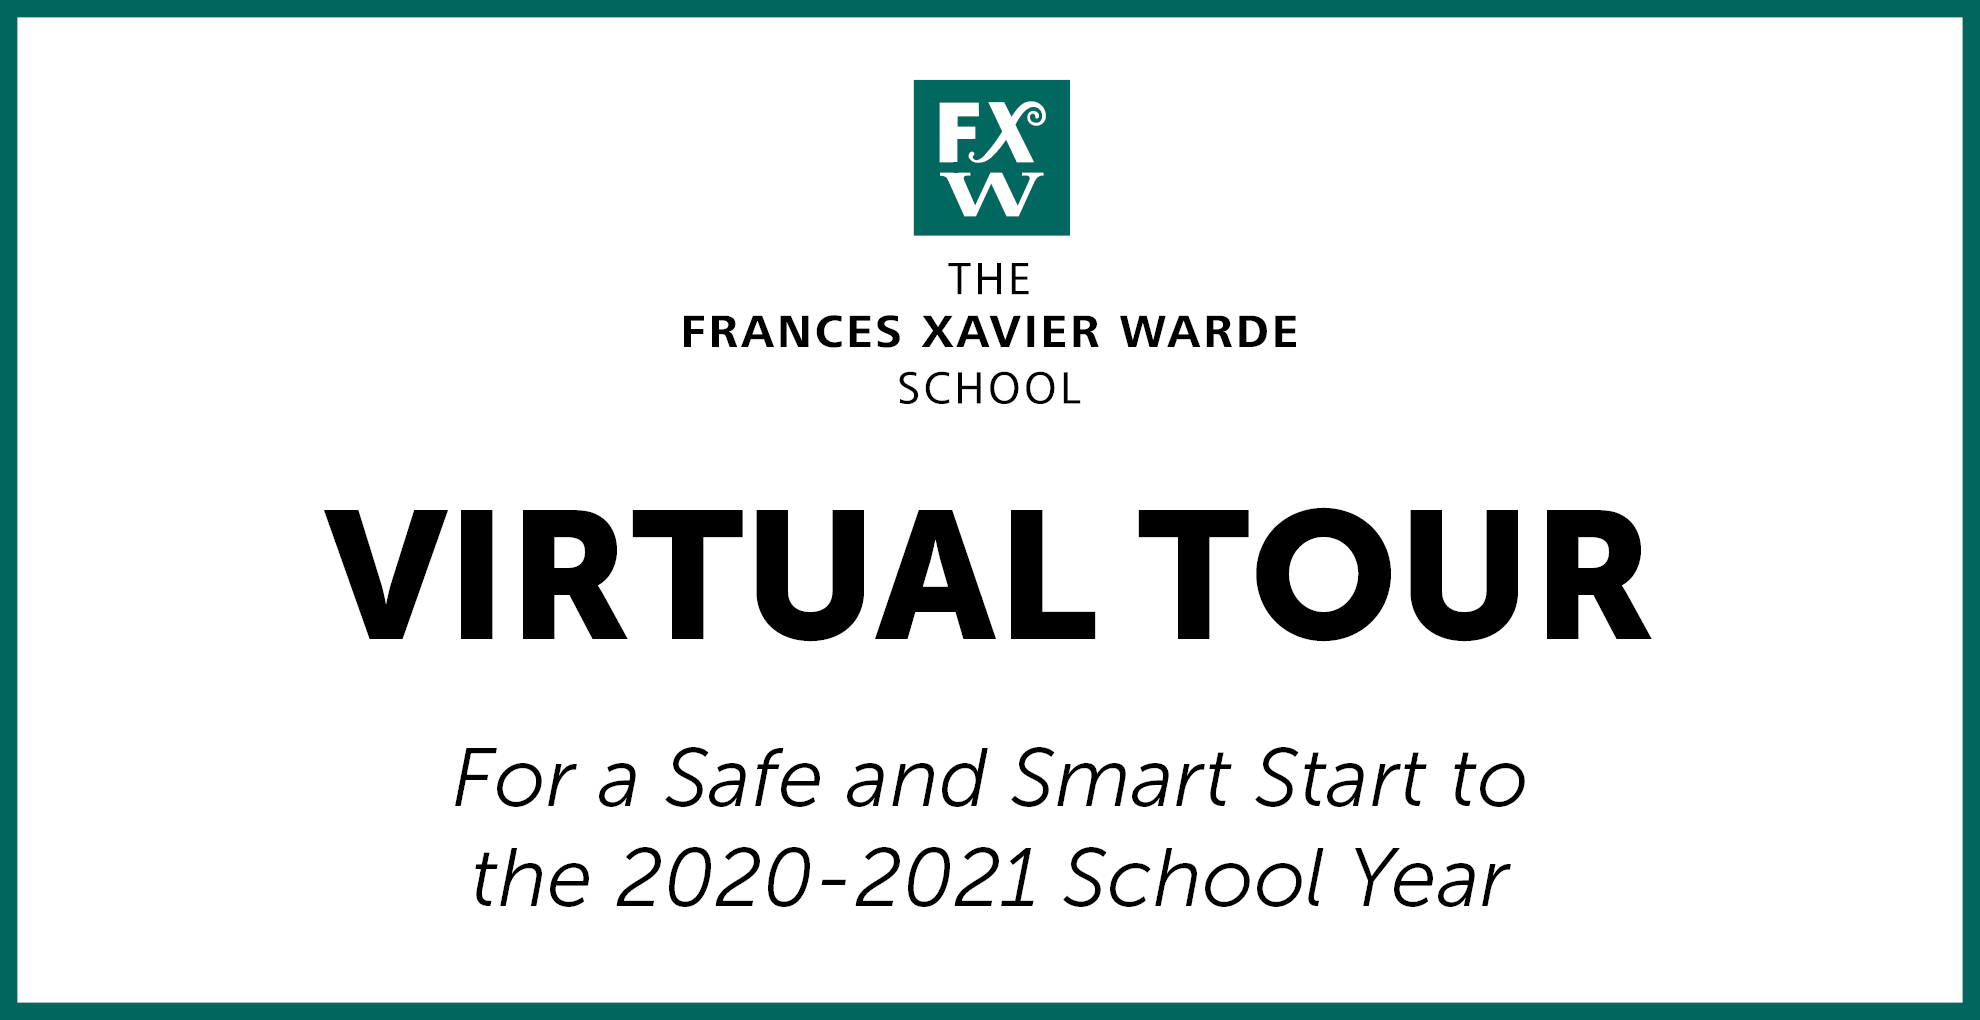 Virtual Tour for a Safe and Smart Start to the 2020-2021 School Year